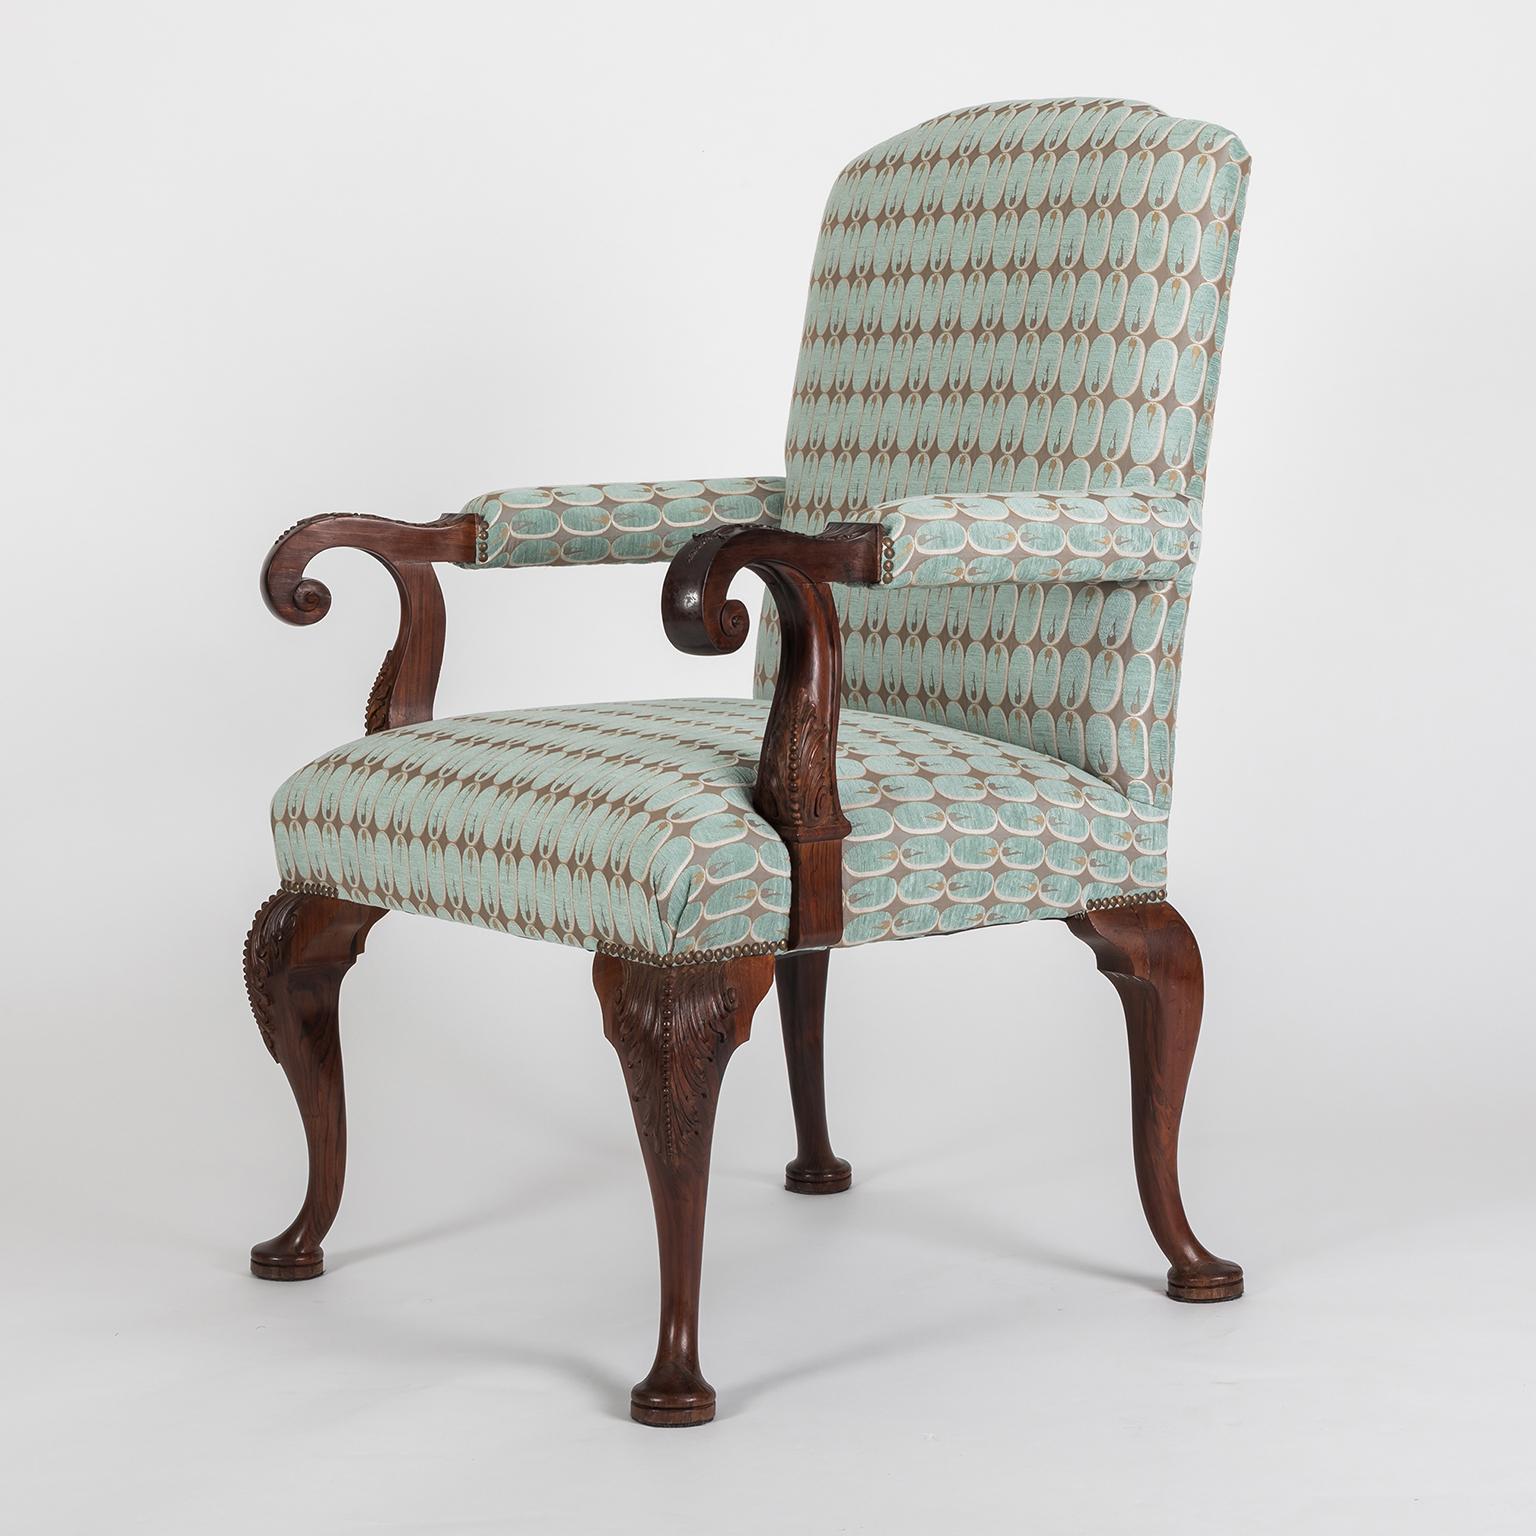 This very elegant and Classic armchair, has beautiful hand carved details in the solid Mahogany structure.
It was restaured and re-upholstered in a blue and grey Kravet design fabric.

Dimensions:
Width 72 cm; depth 72 cm; seat depth 60 cm;